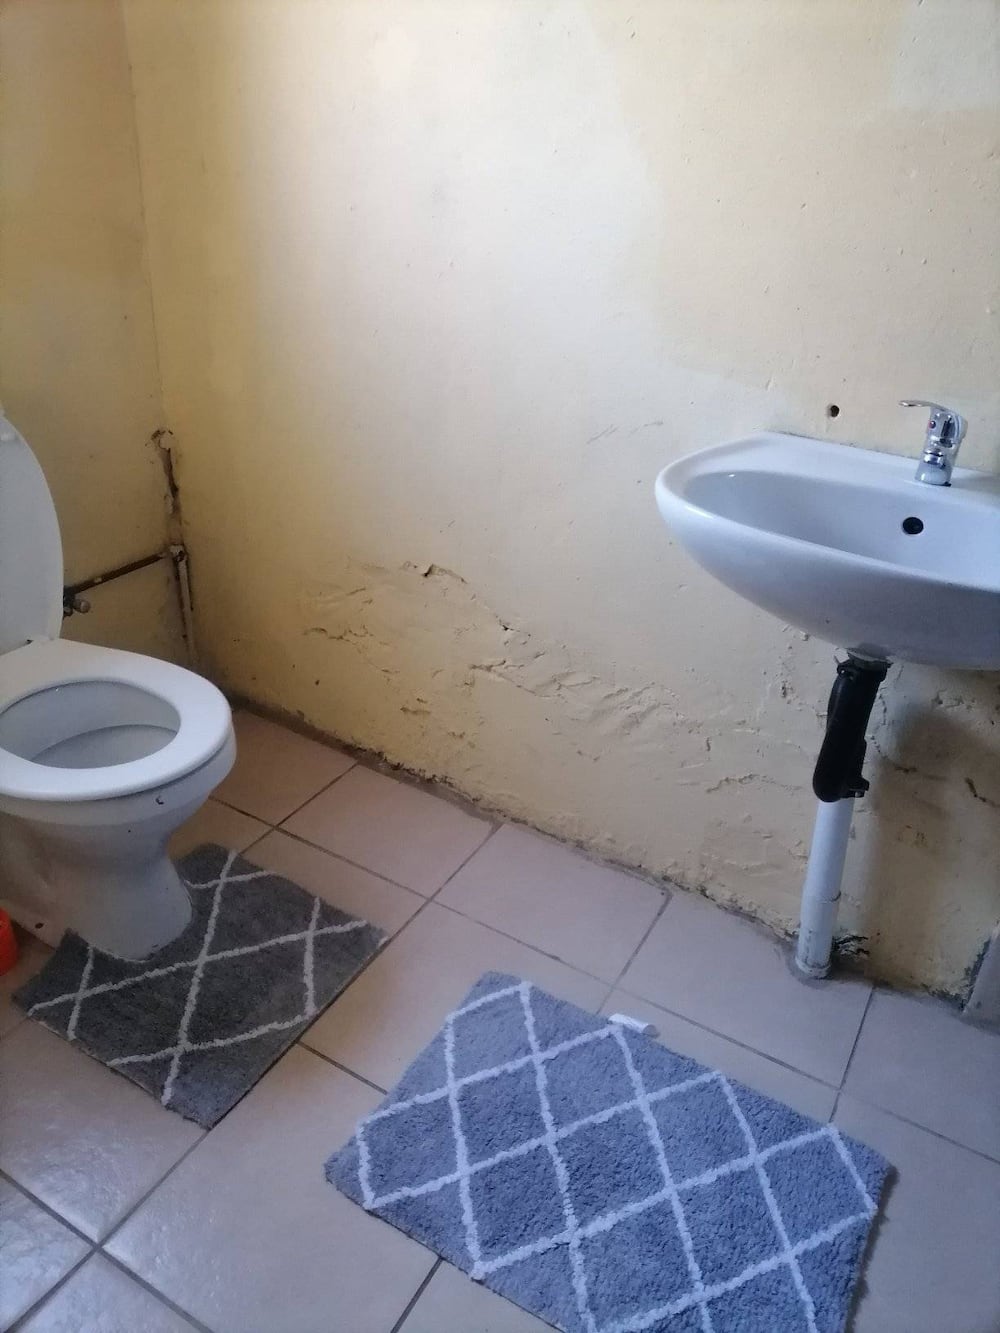 KZN woman shows off the bathroom of her new place.